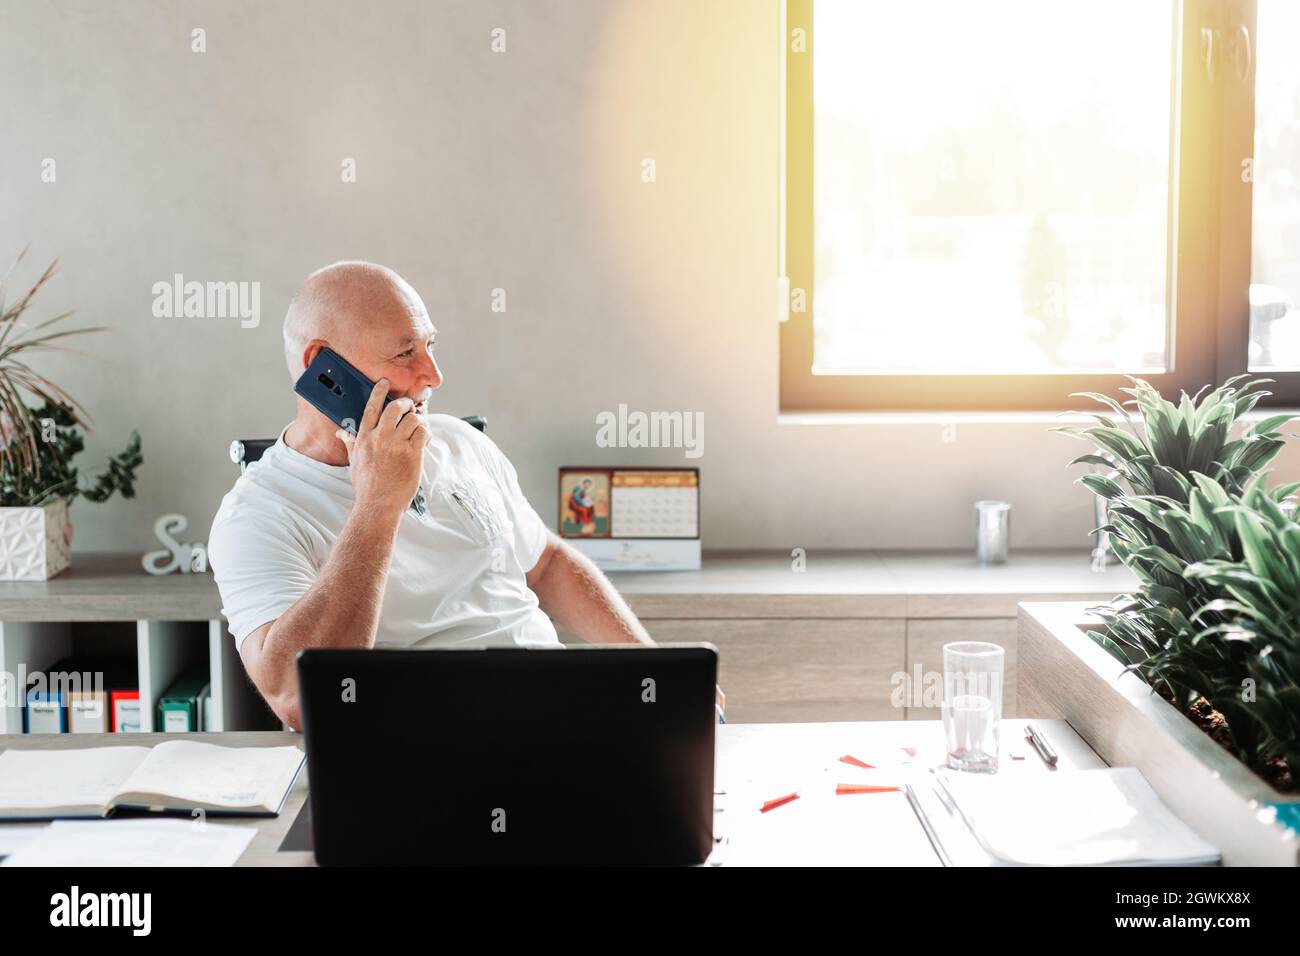 Middle aged business man talking on the phone in the office. Casual work wear. Business concept Stock Photo